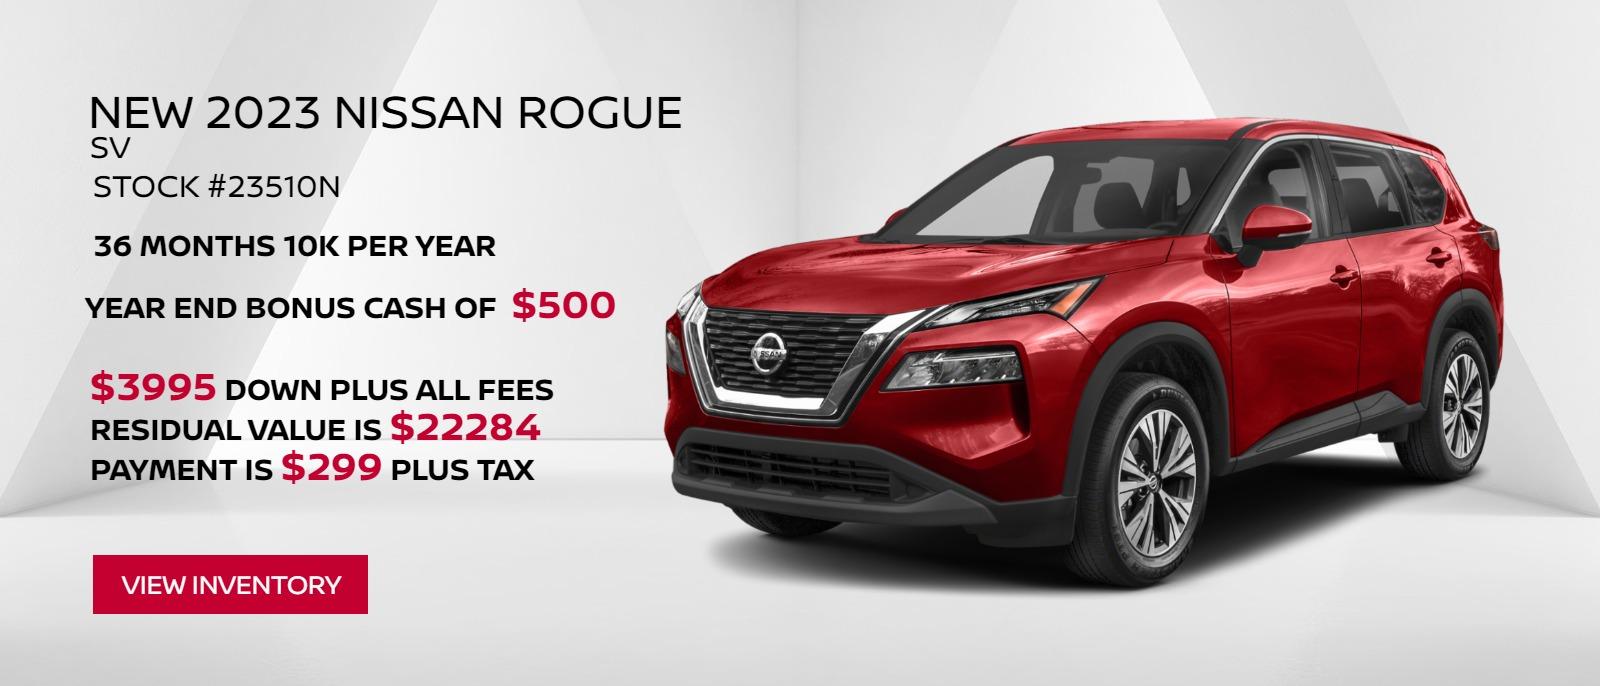 stk # 23510N
2023 nissan rogue sv lease 36 months 10k per year 3995.00 down plus all fees residual value is 22284.20 payment is 299.00 plus tax + loyalty rebate of 500